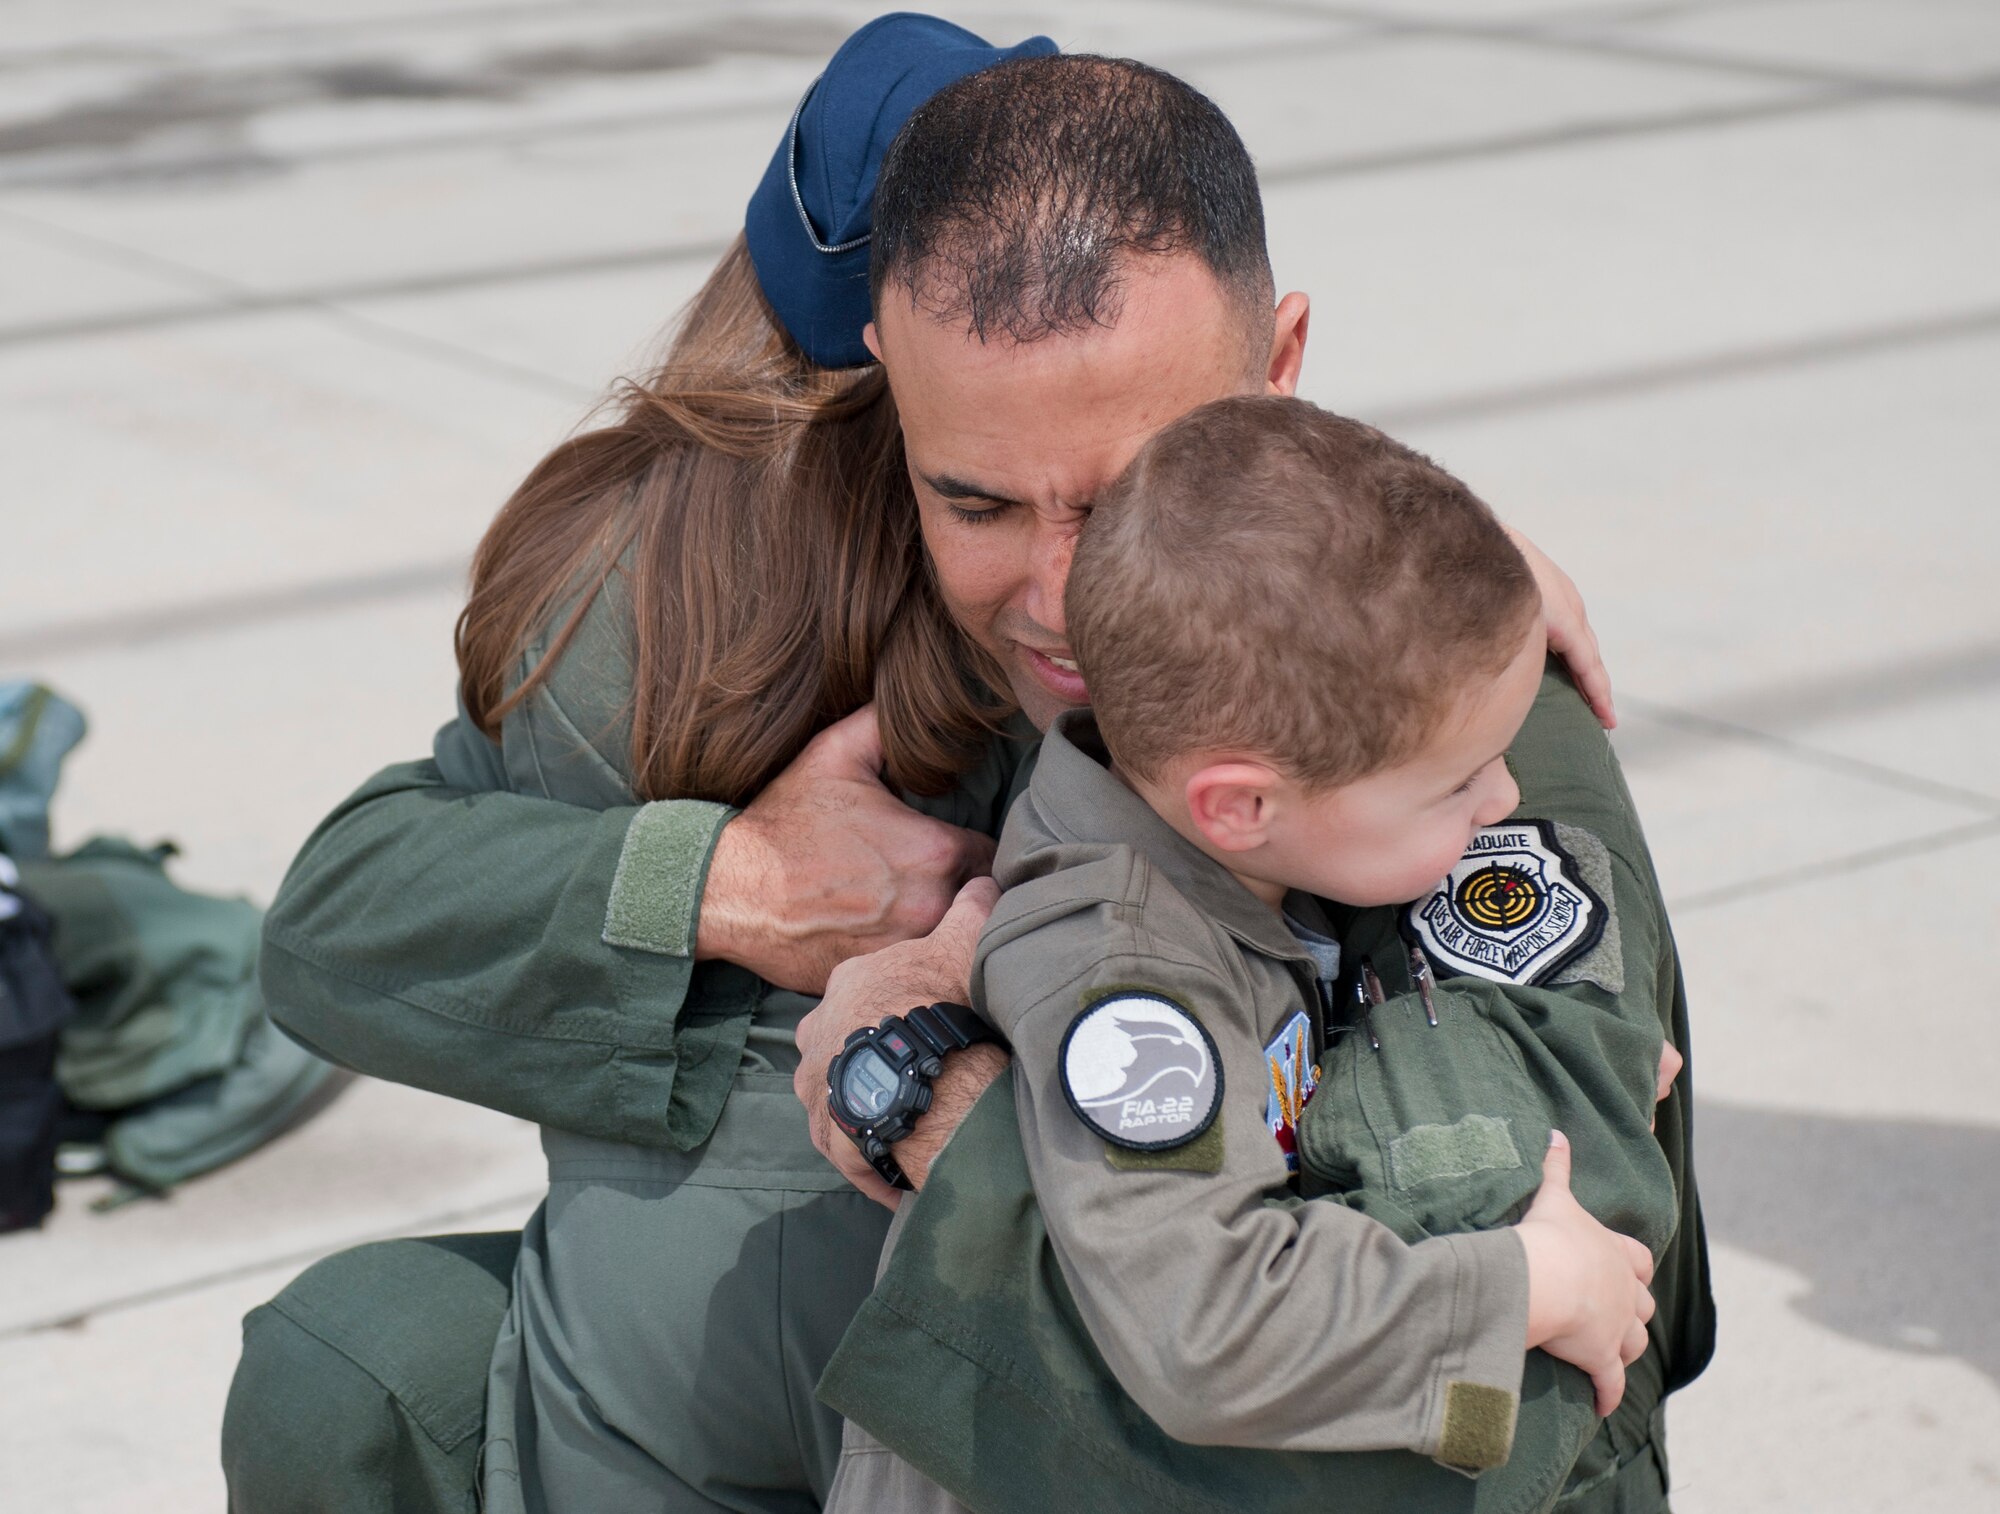 Col. Adrian Spain, U.S. Air Force Weapons School commandant, hugs his children after his final flight as the USAFWS commandant at Nellis Air Force Base, Nev., May 11, 2015. The event marked the first time Spain’s children were able to see their dad fly an aircraft. (U.S. Air Force photo by Airman 1st Class Mikaley Towle)